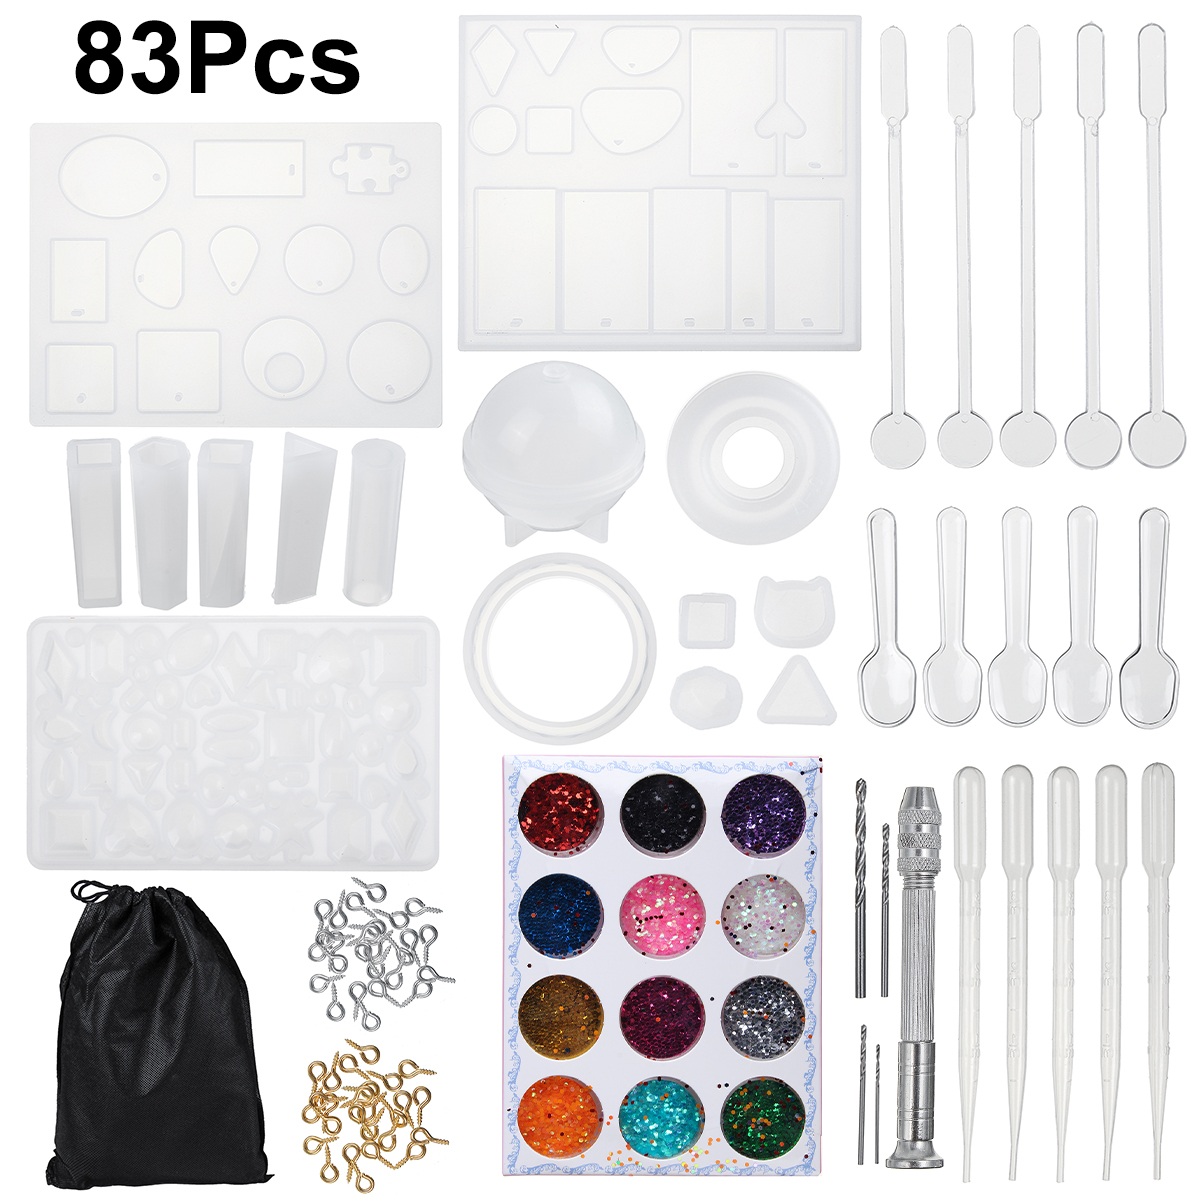 83Pcs-Jewelry-Making-Silicone-Molds-DIY-Crafts-Cameo-Pendants-Hand-Tools-1663015-1